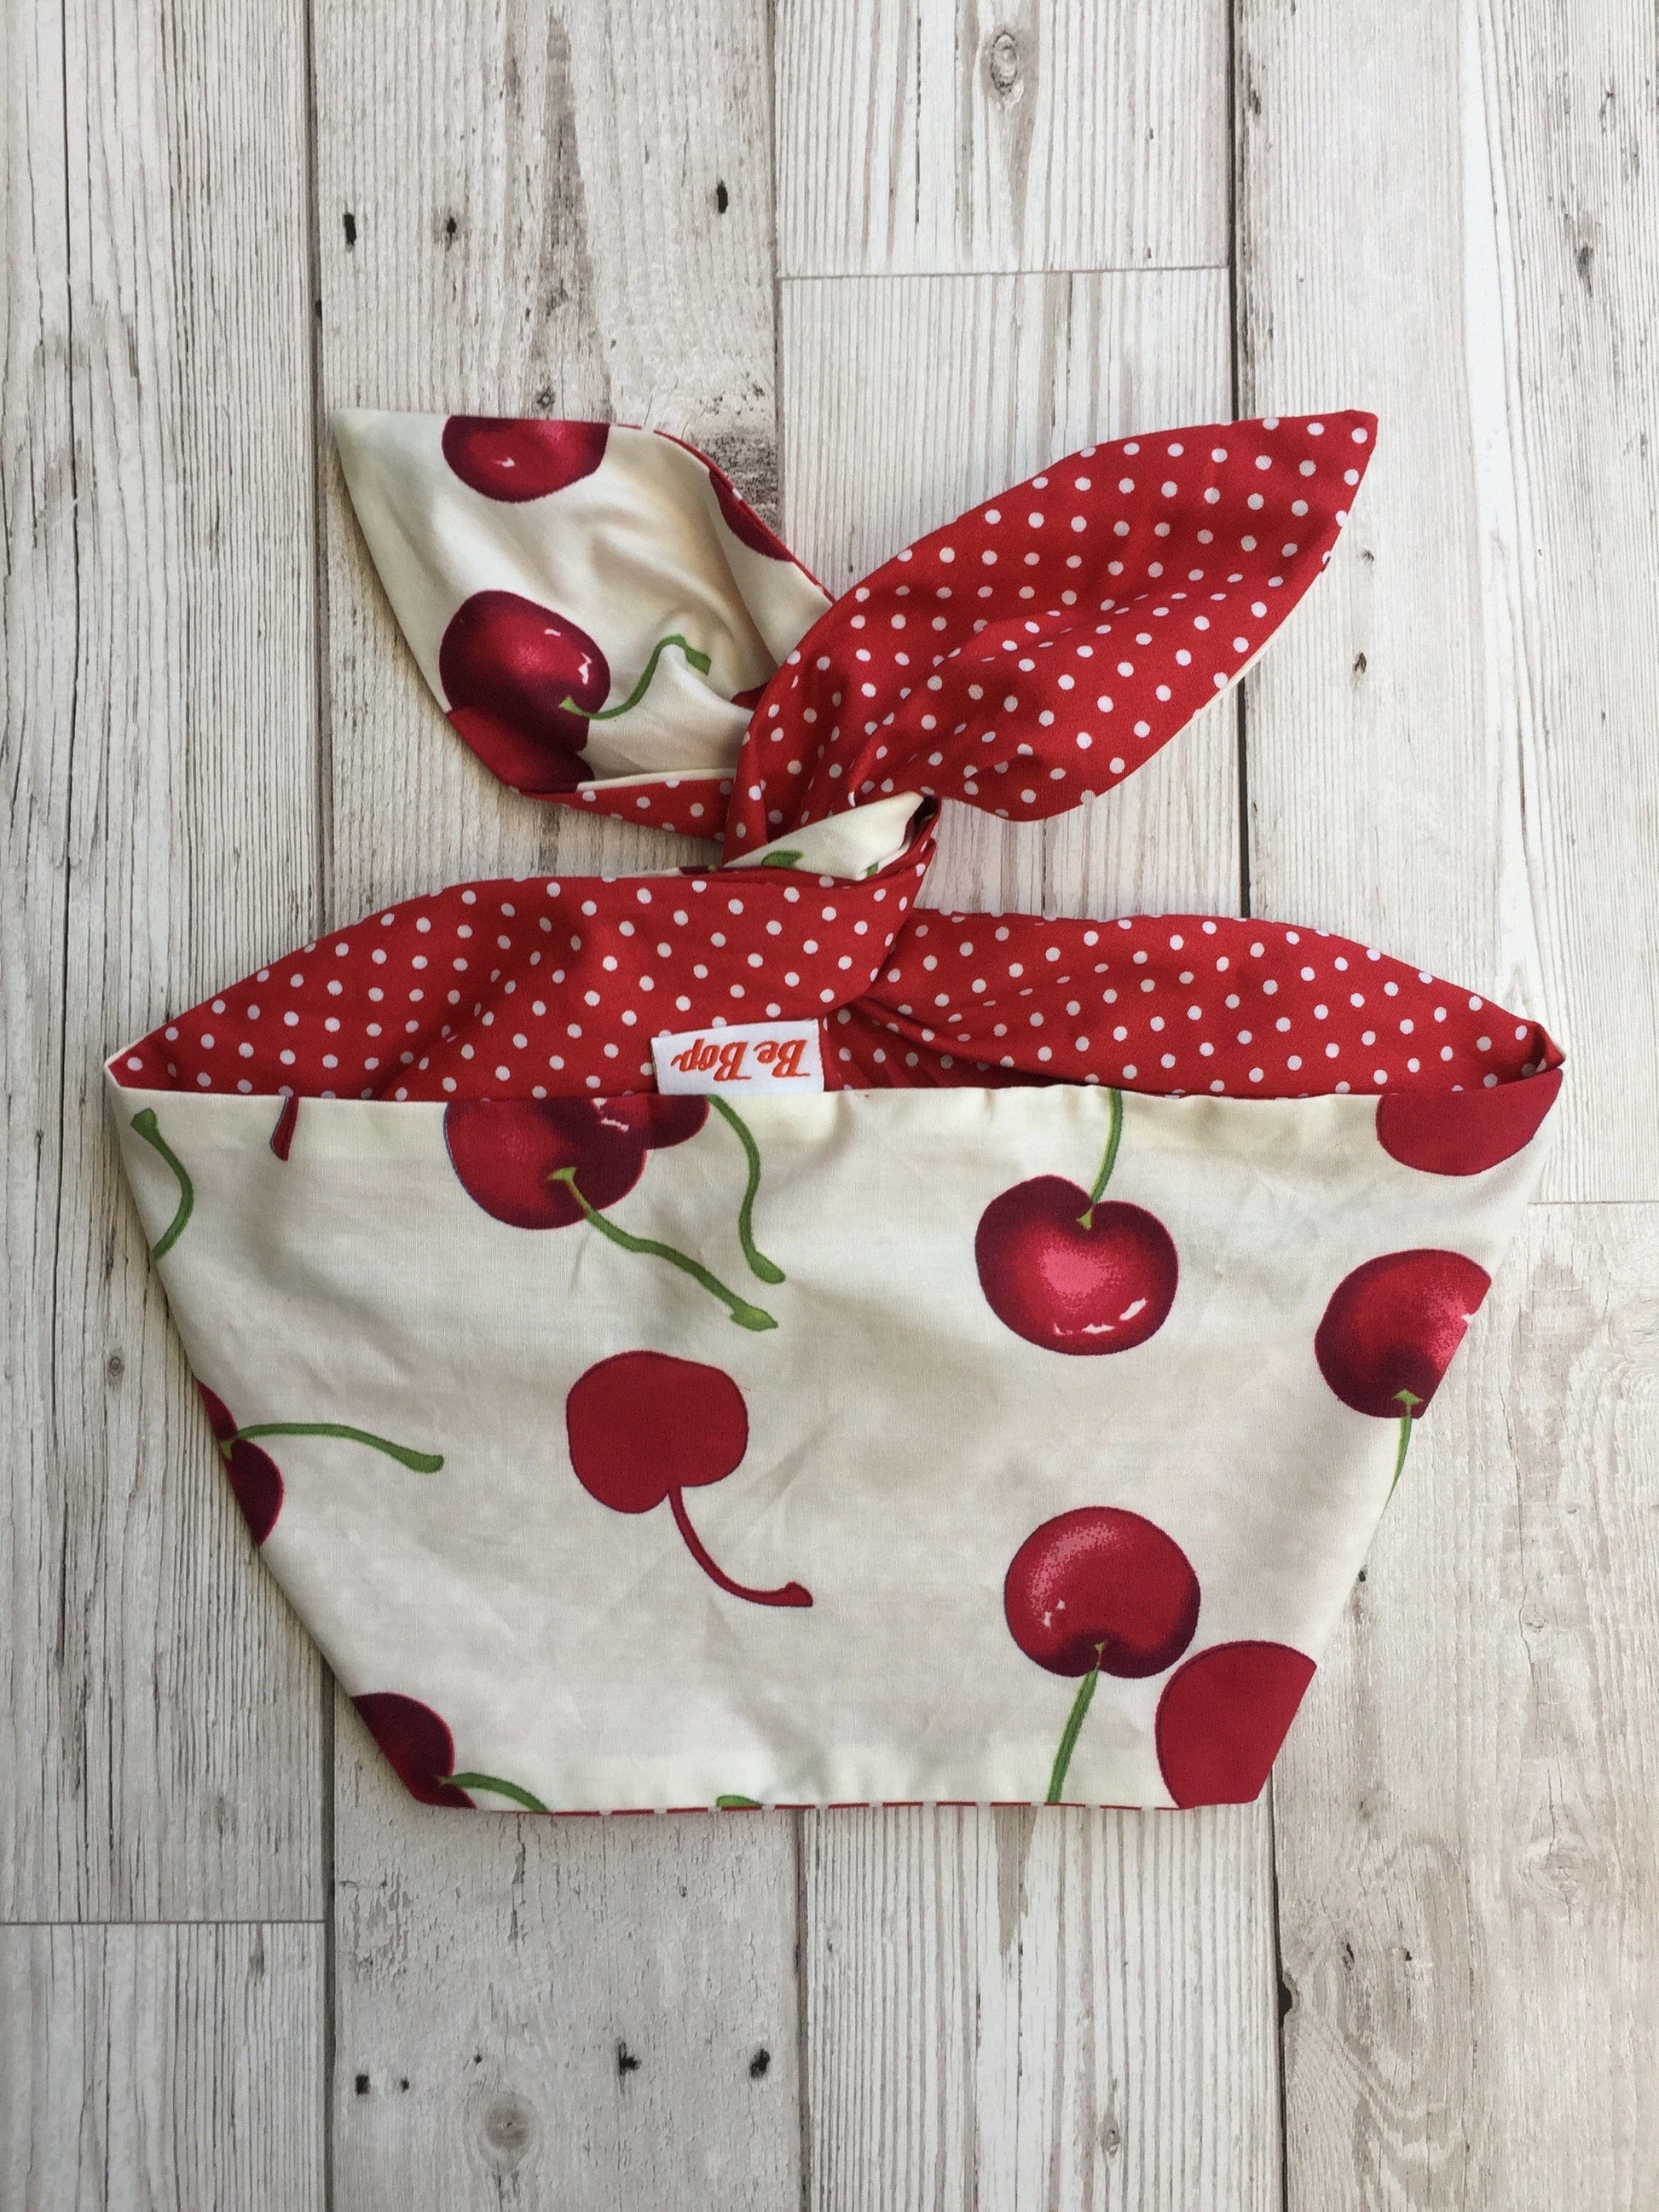 BettyliciousUK Head Scarf, White/Cherry Print with Red and White Polka Dot Reverse